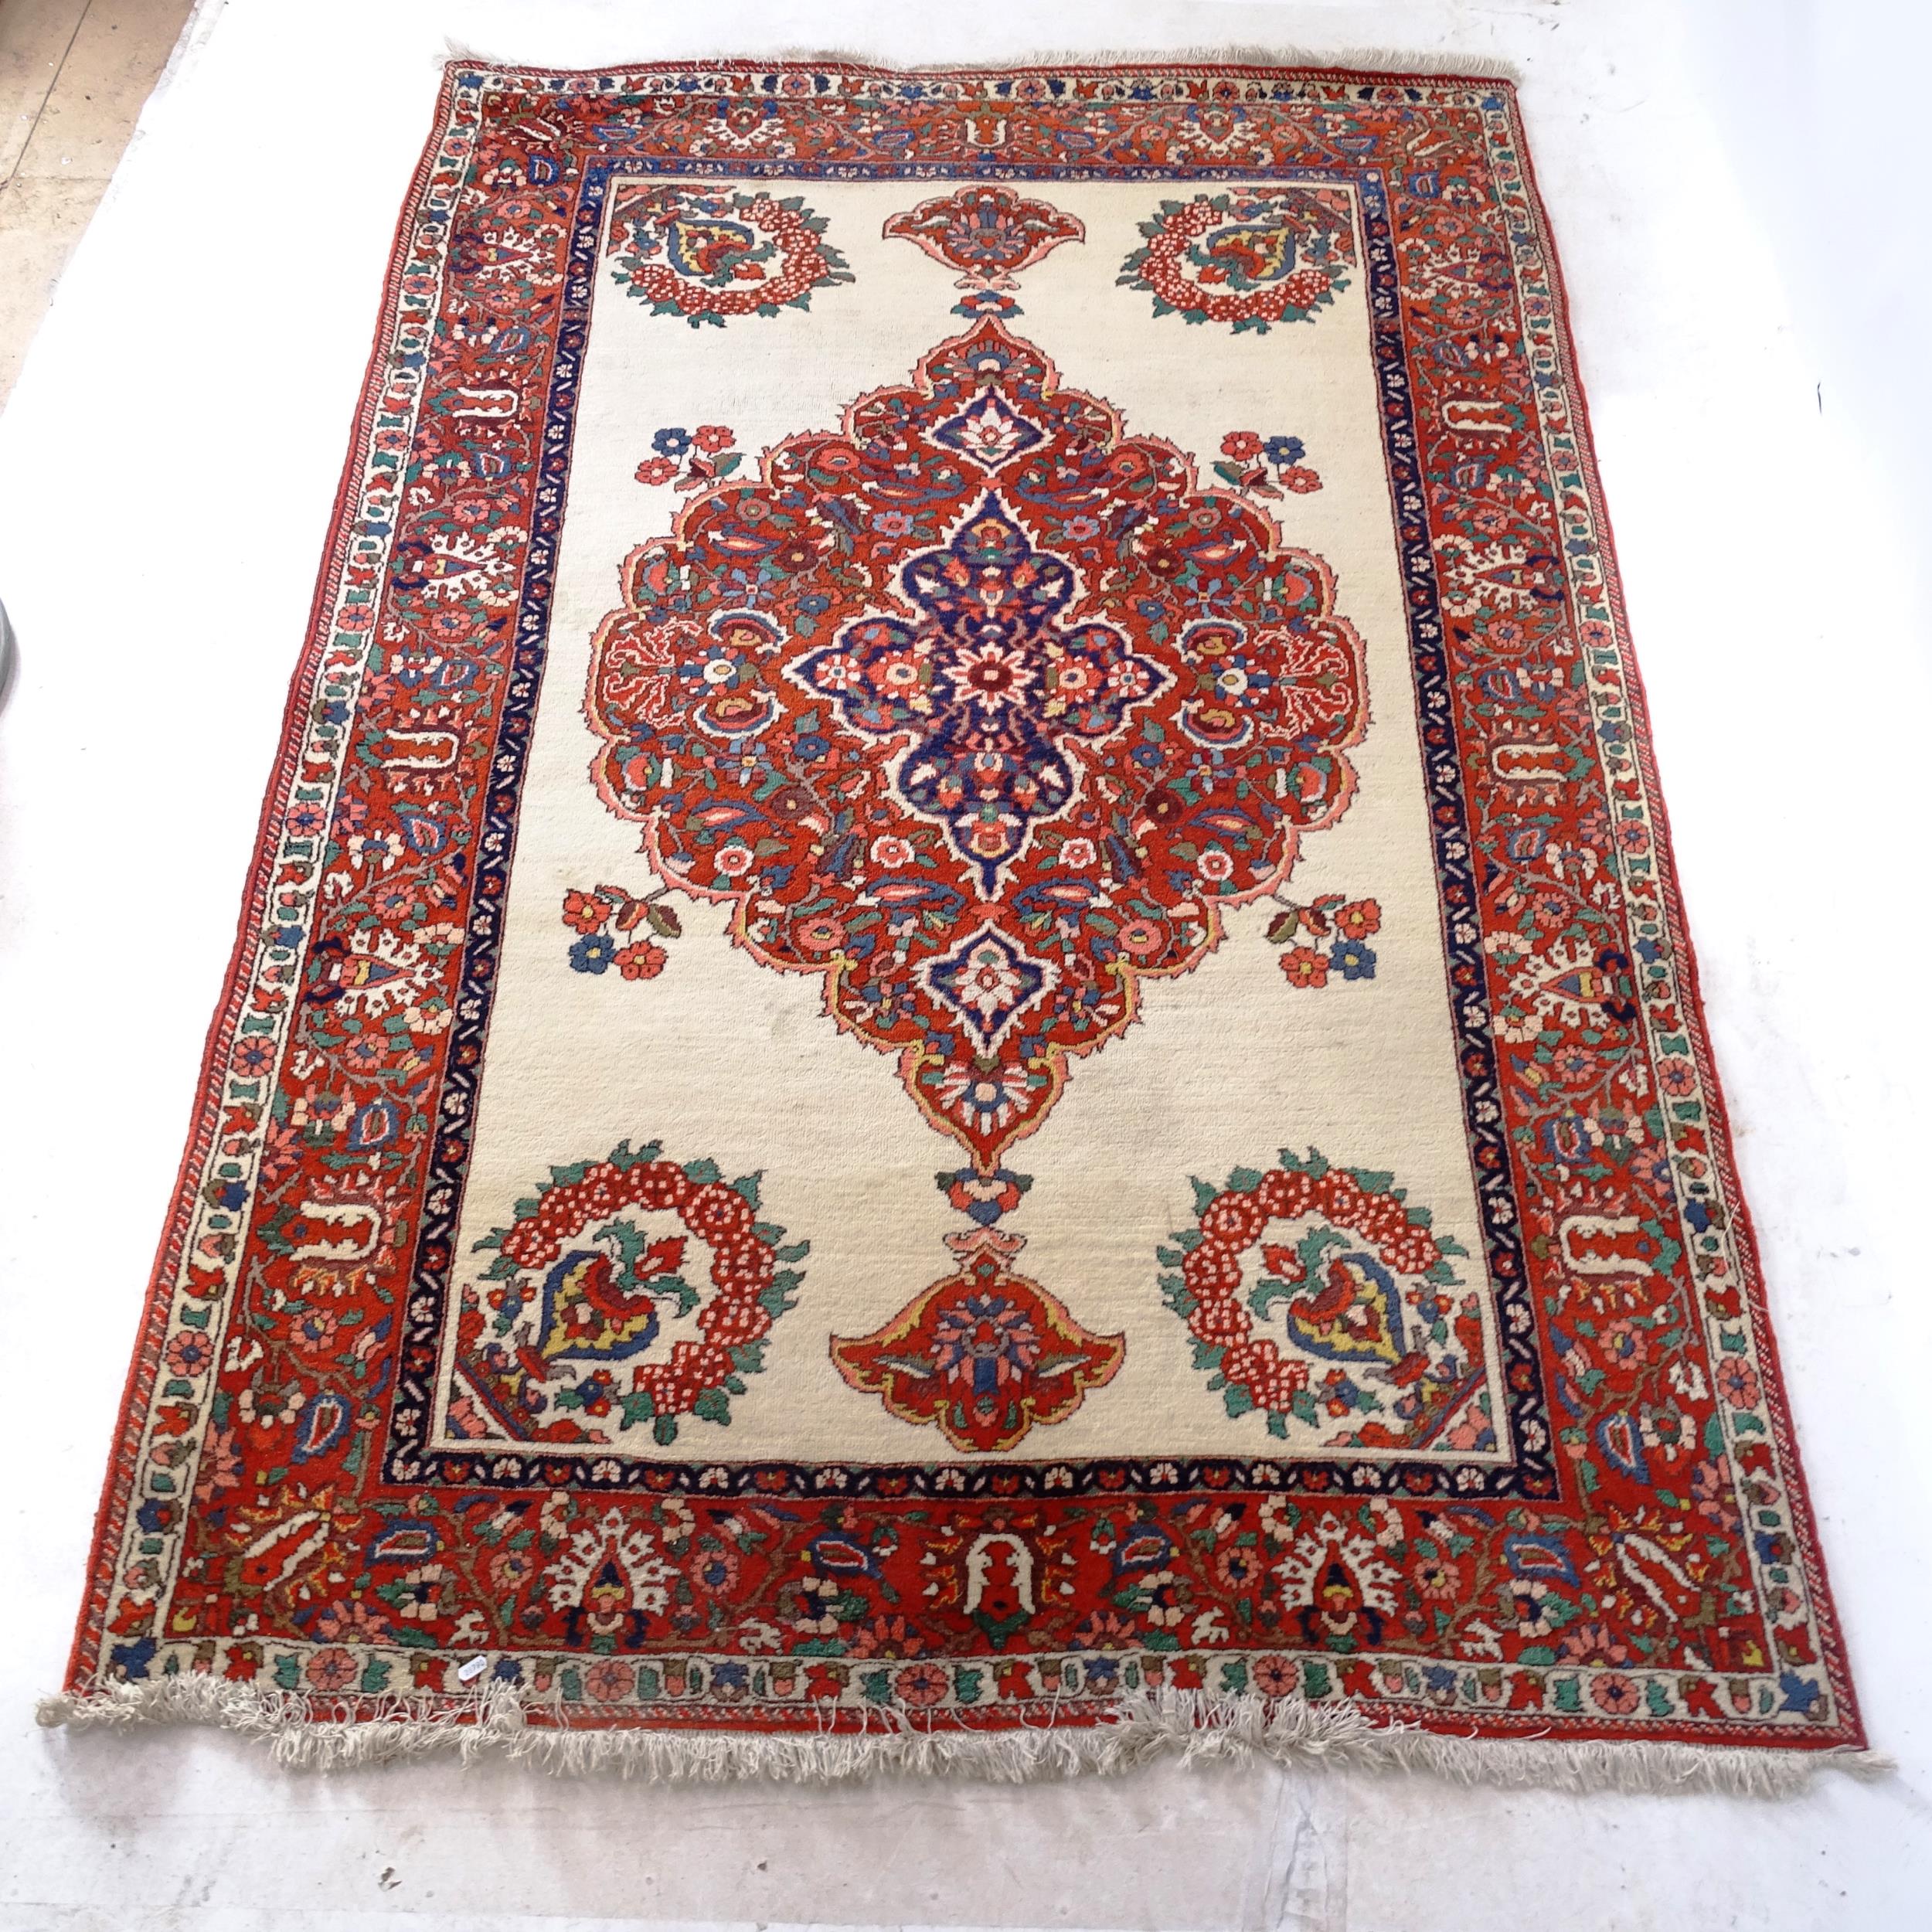 A red and cream ground Persian design rug, with symmetrical pattern and lozenge, 230cm x 160cm